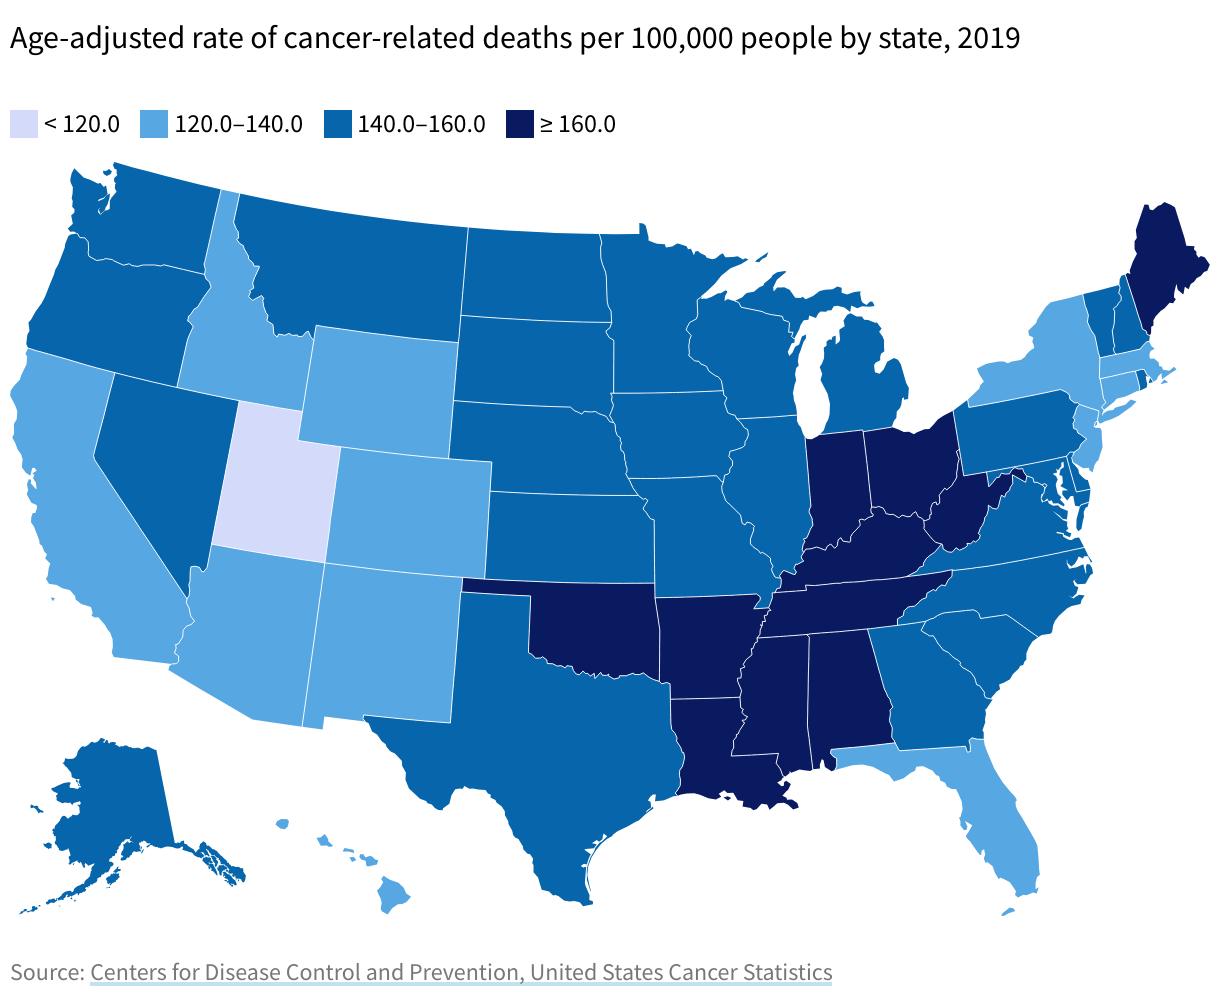 Many Cancers Are on the Rise in the U.S., Even as Overall Deaths